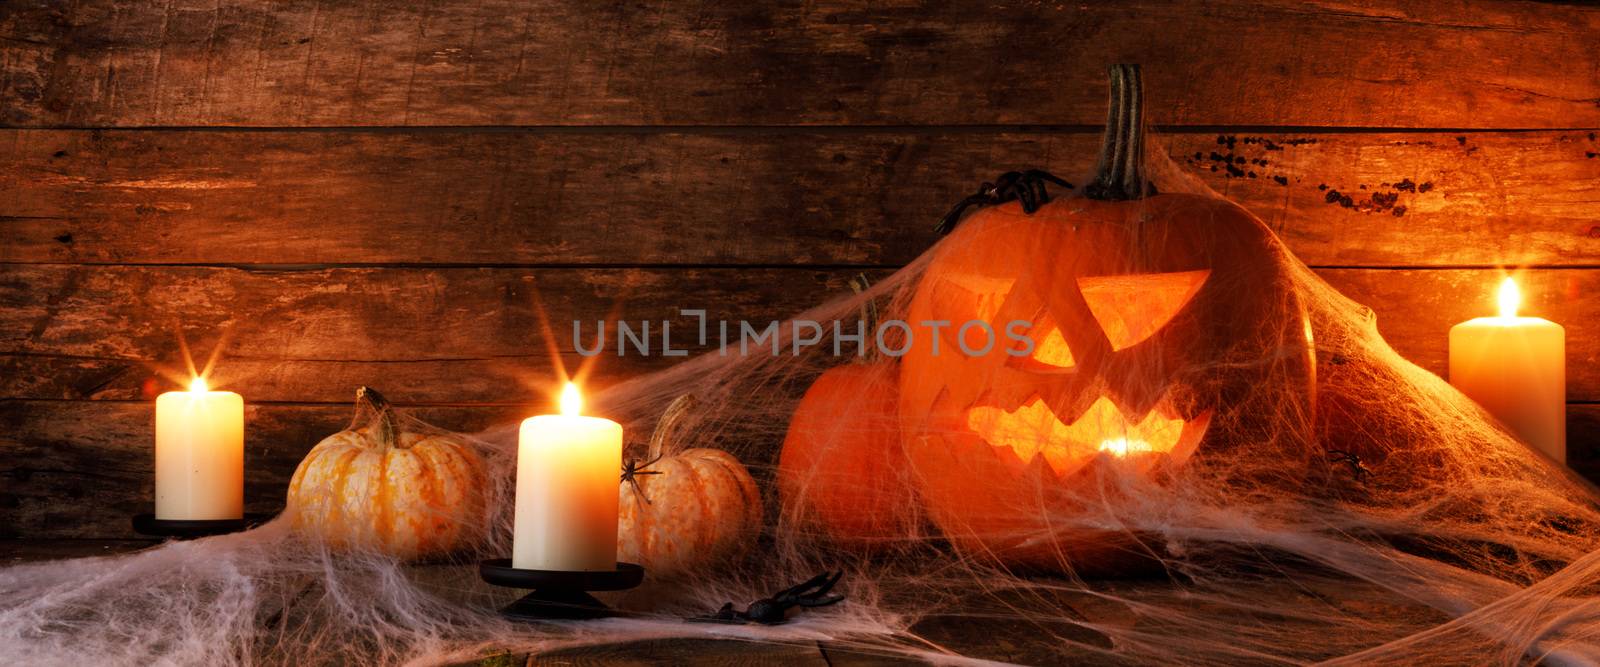 Jack O Lantern Halloween pumpkins, spiders on web and burning candles